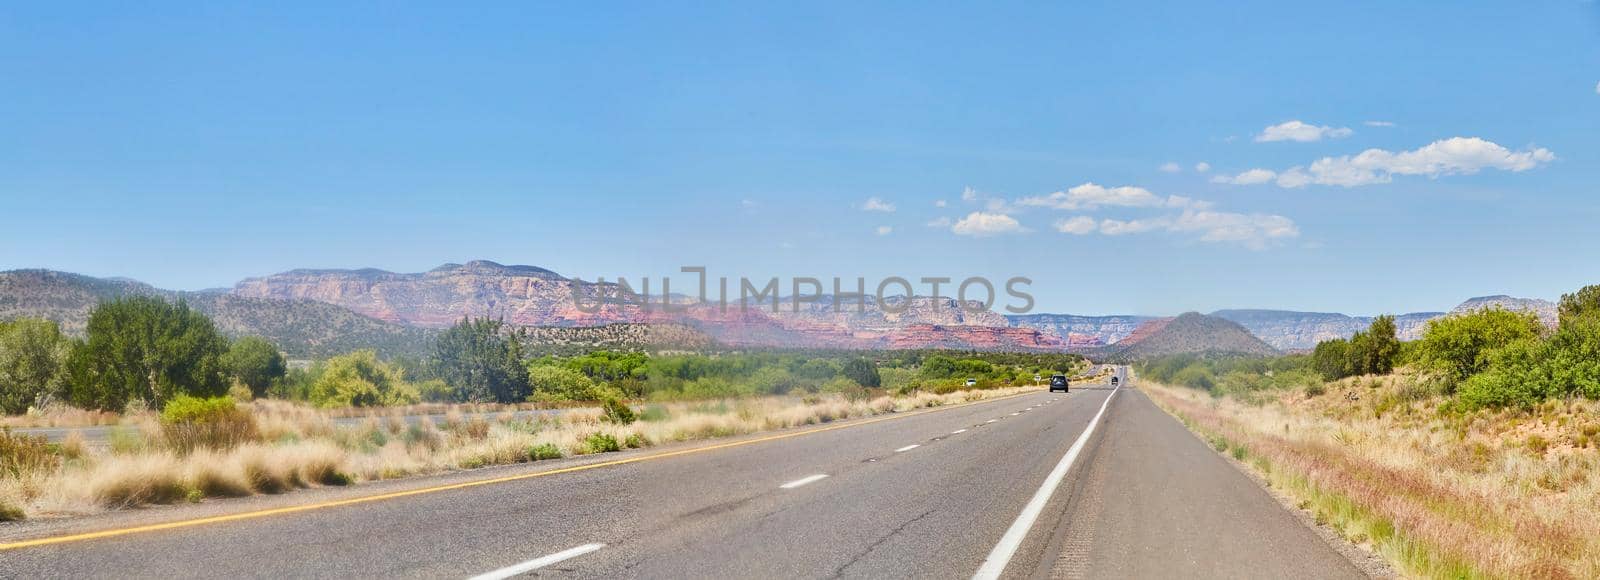 Panorama of desert road with red mountains on horizon by njproductions